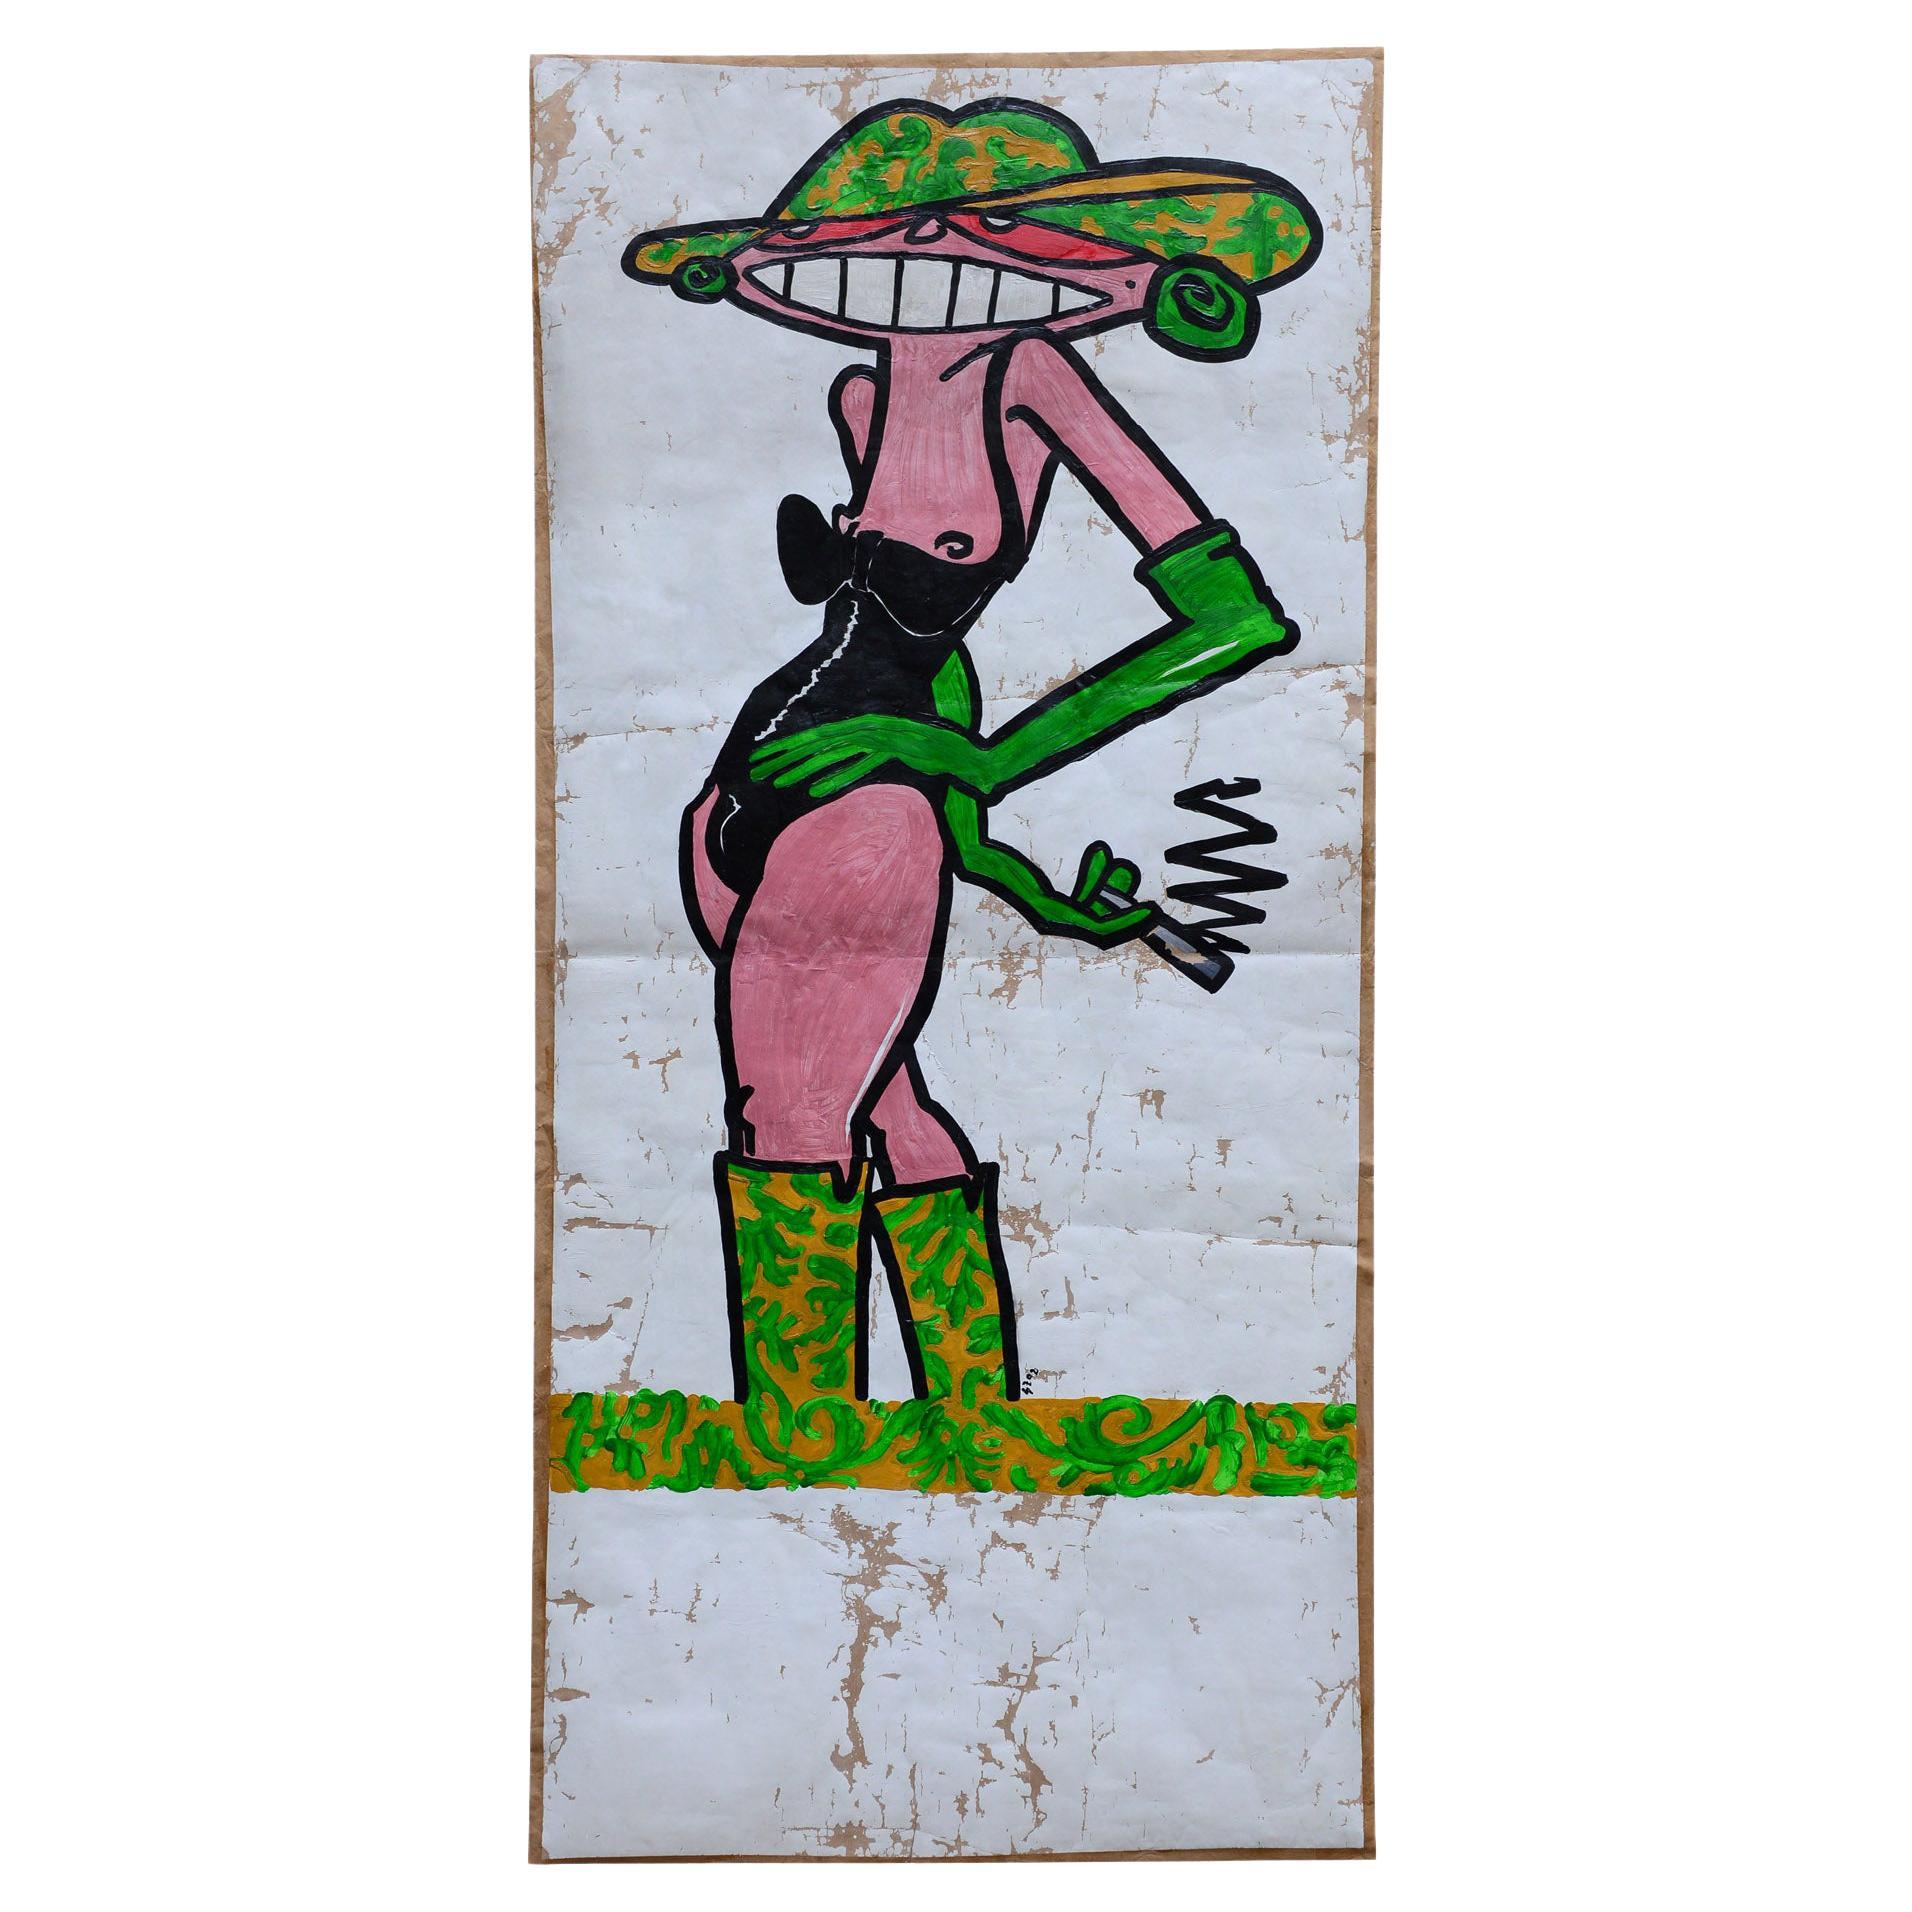 One of Three Graces, Green, for the Emilio Pucci Happening For Sale